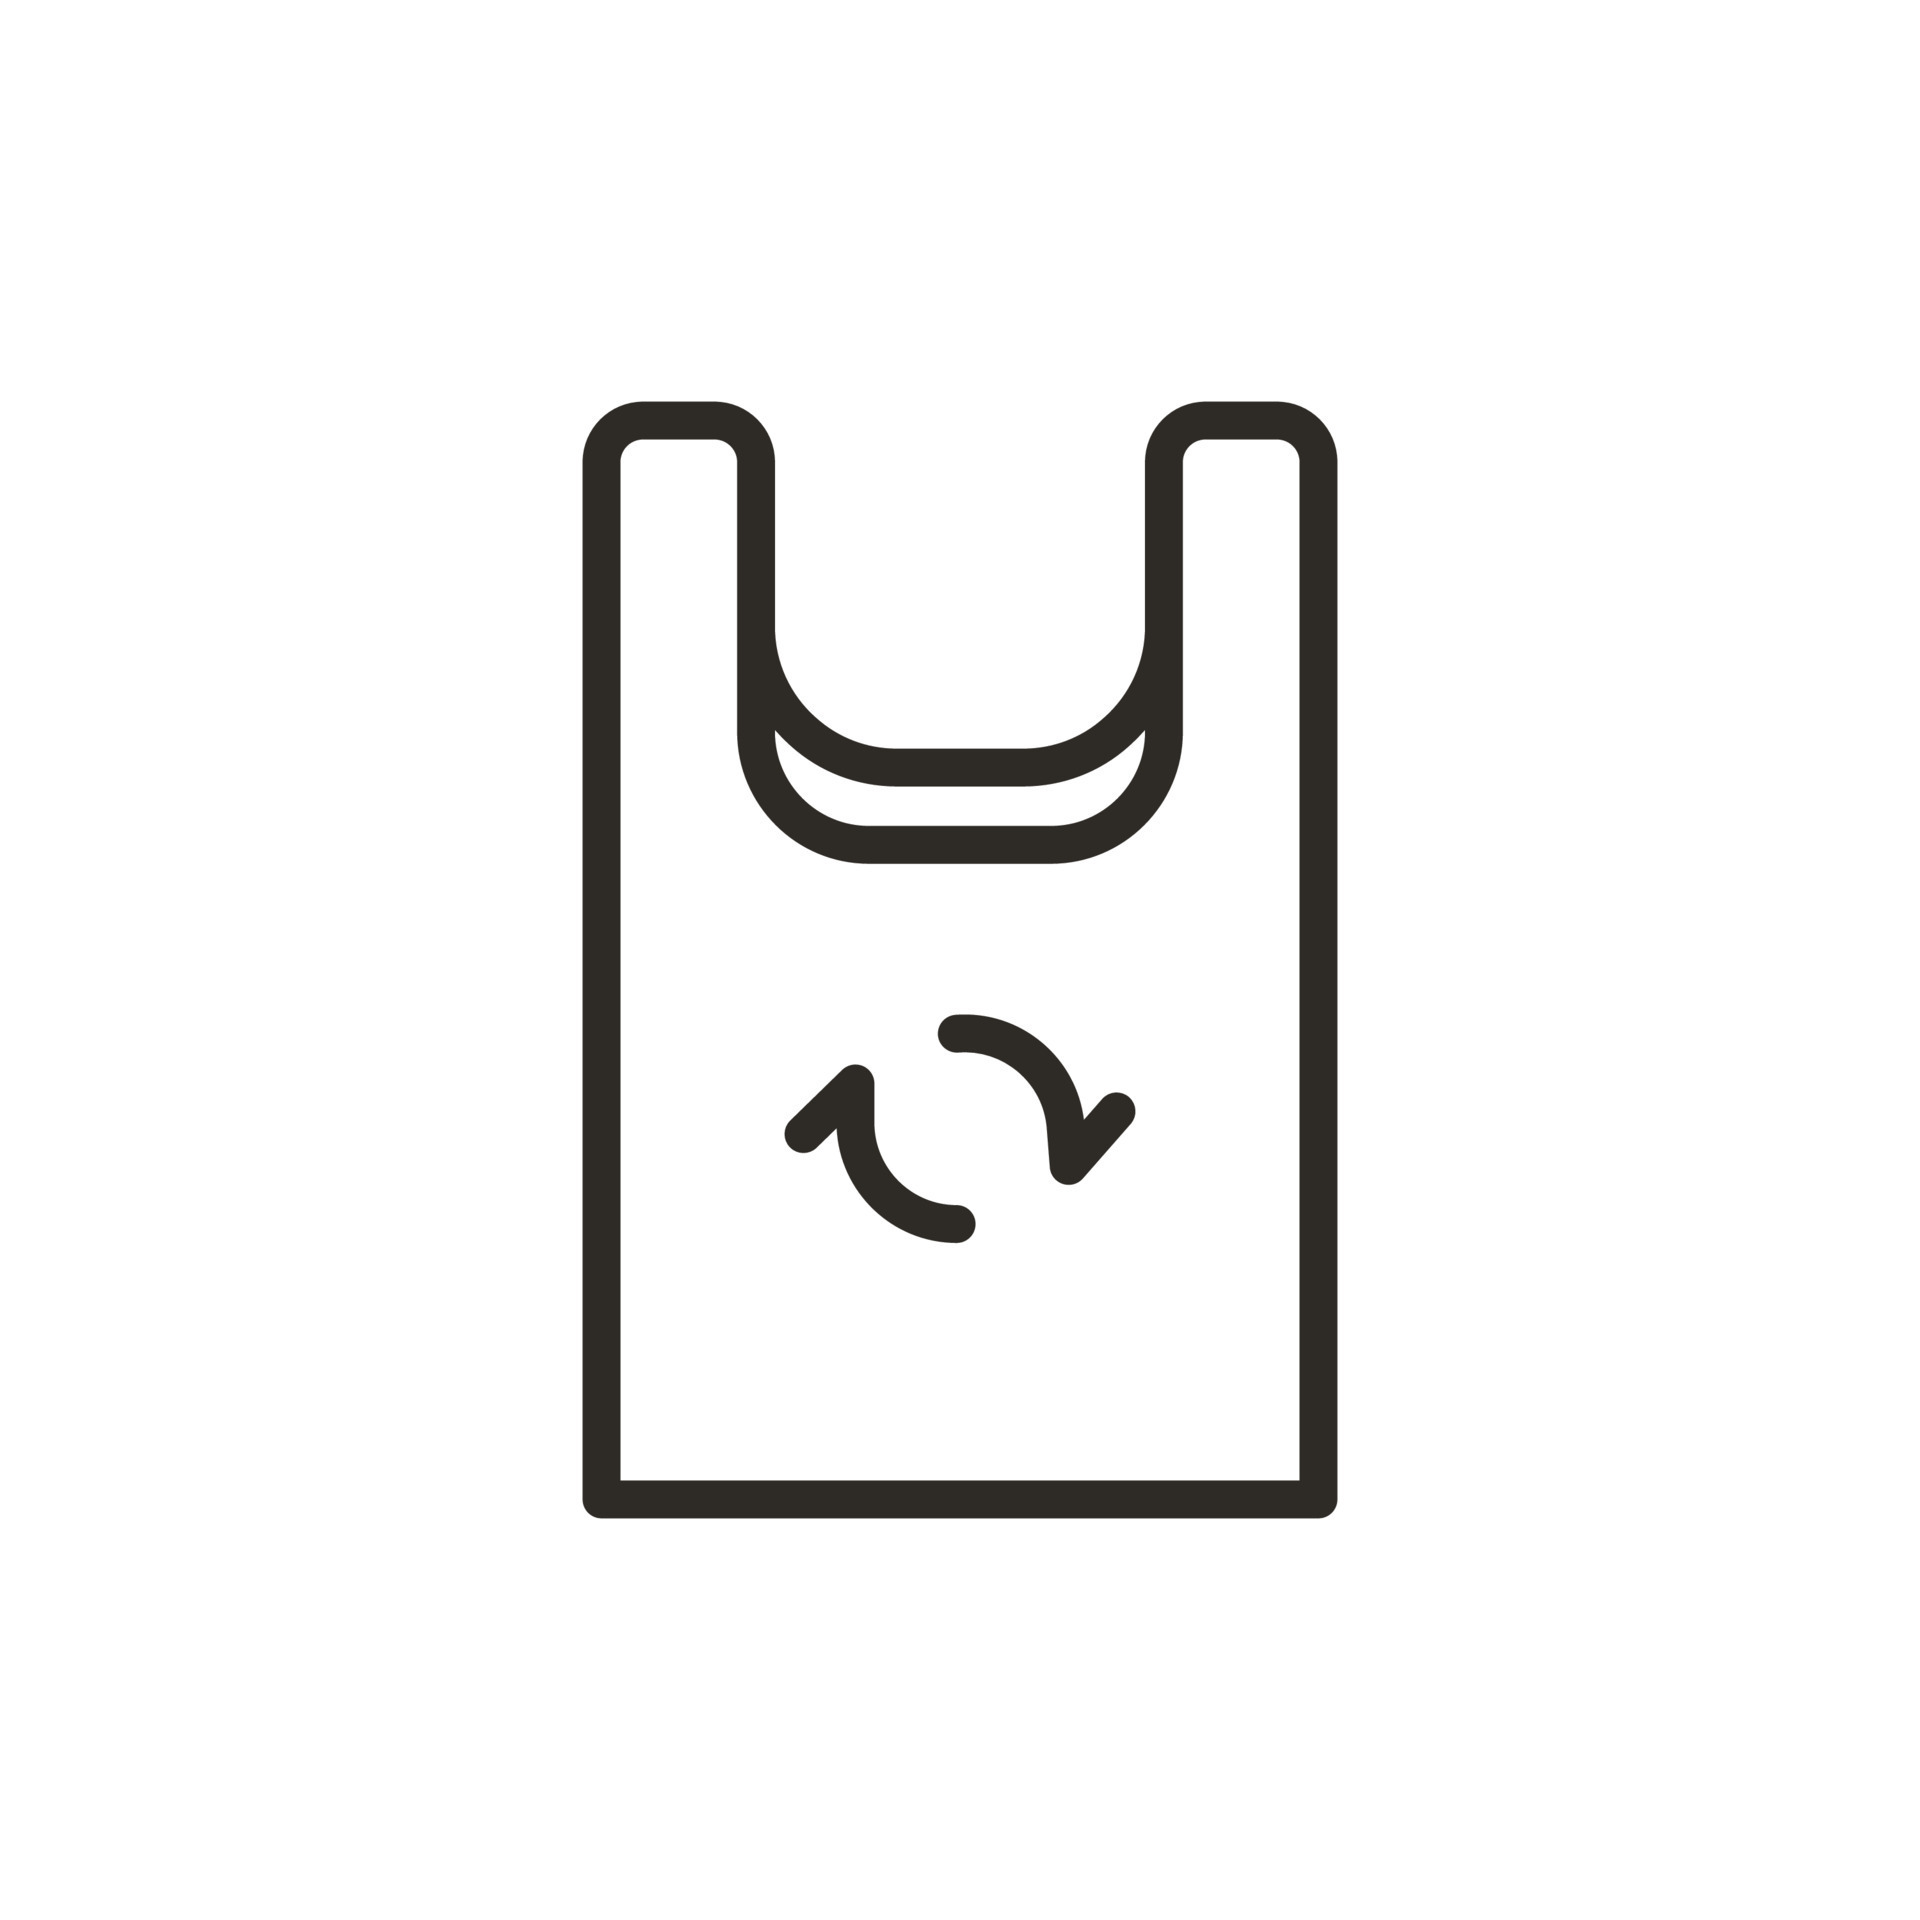 Recycled Plastic Bag Icon - Download in Line Style